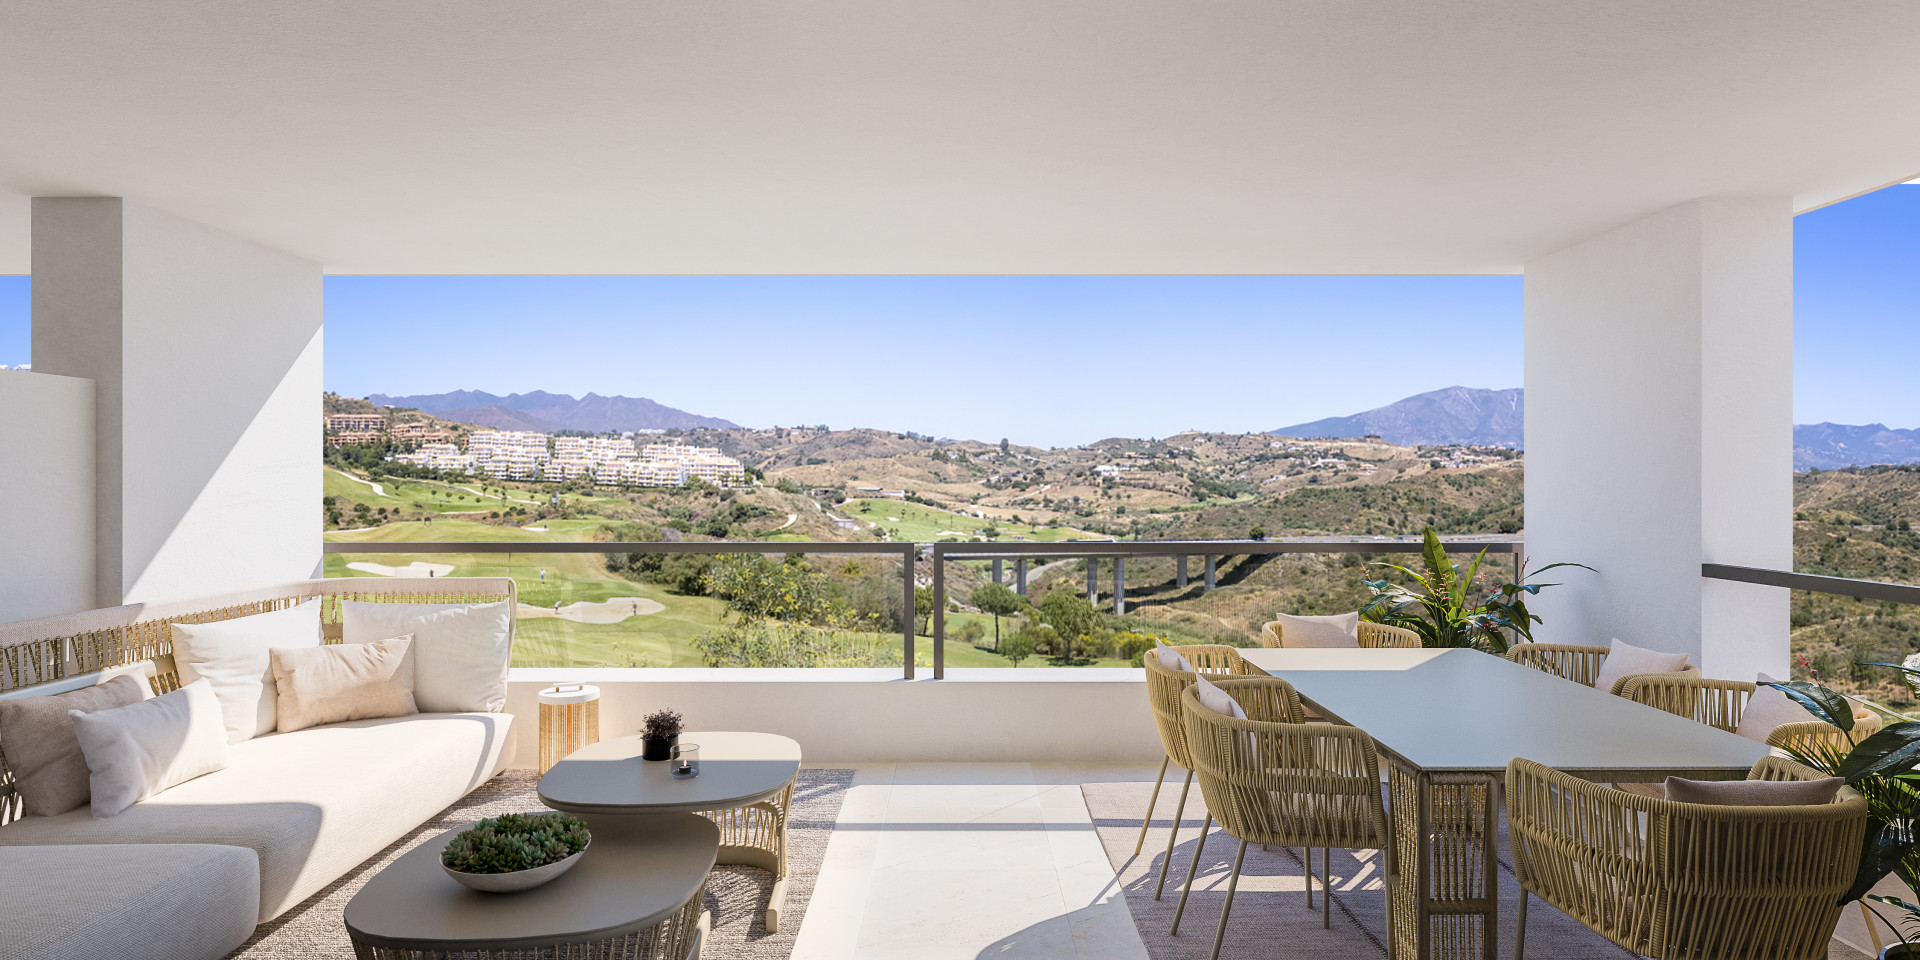 Brand new penthouse with solarium and panoramic views in the municipality of Mijas, Malaga. | Image 3